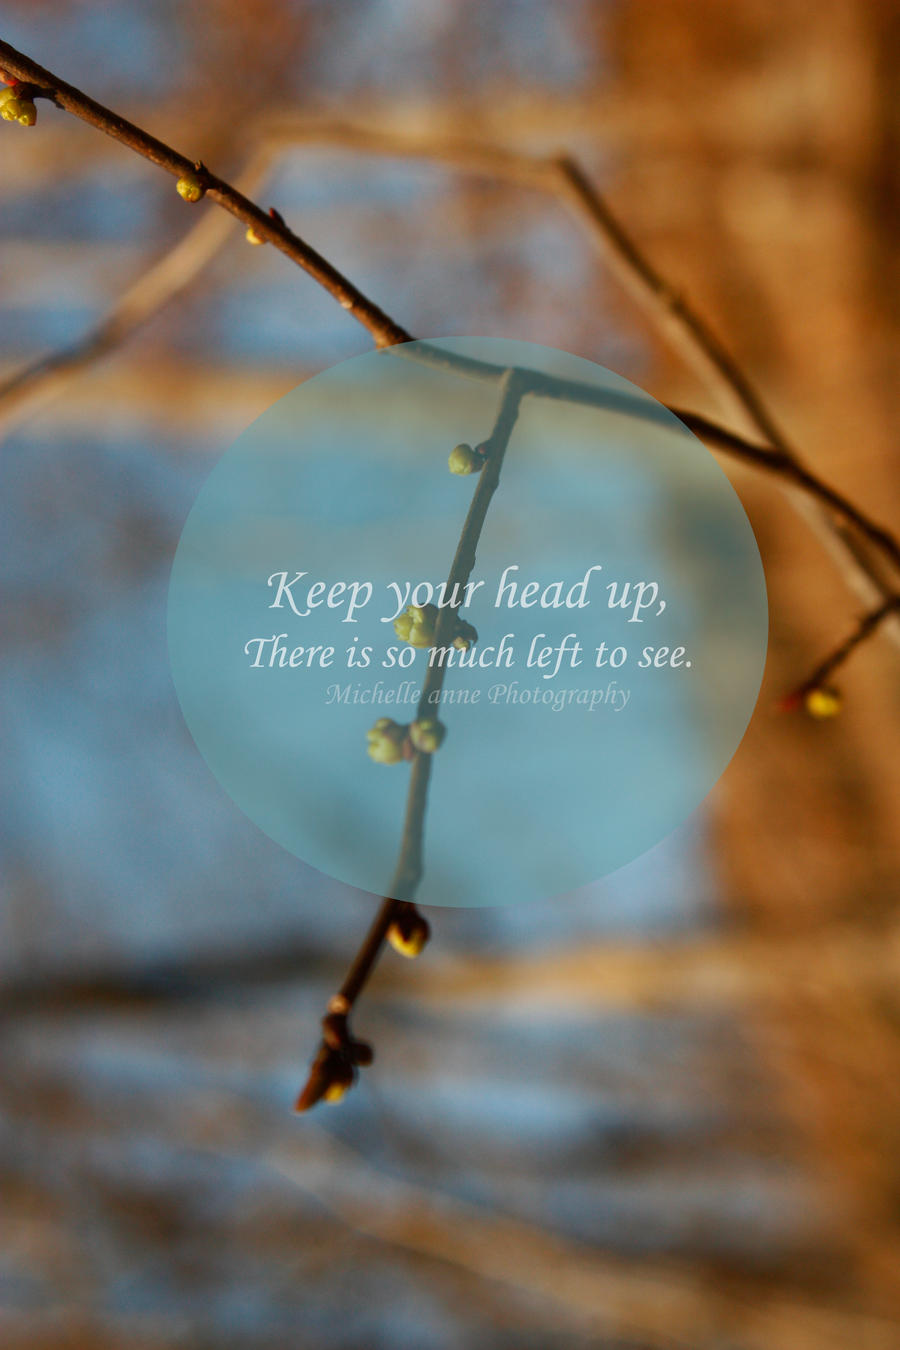 Keep your head up,